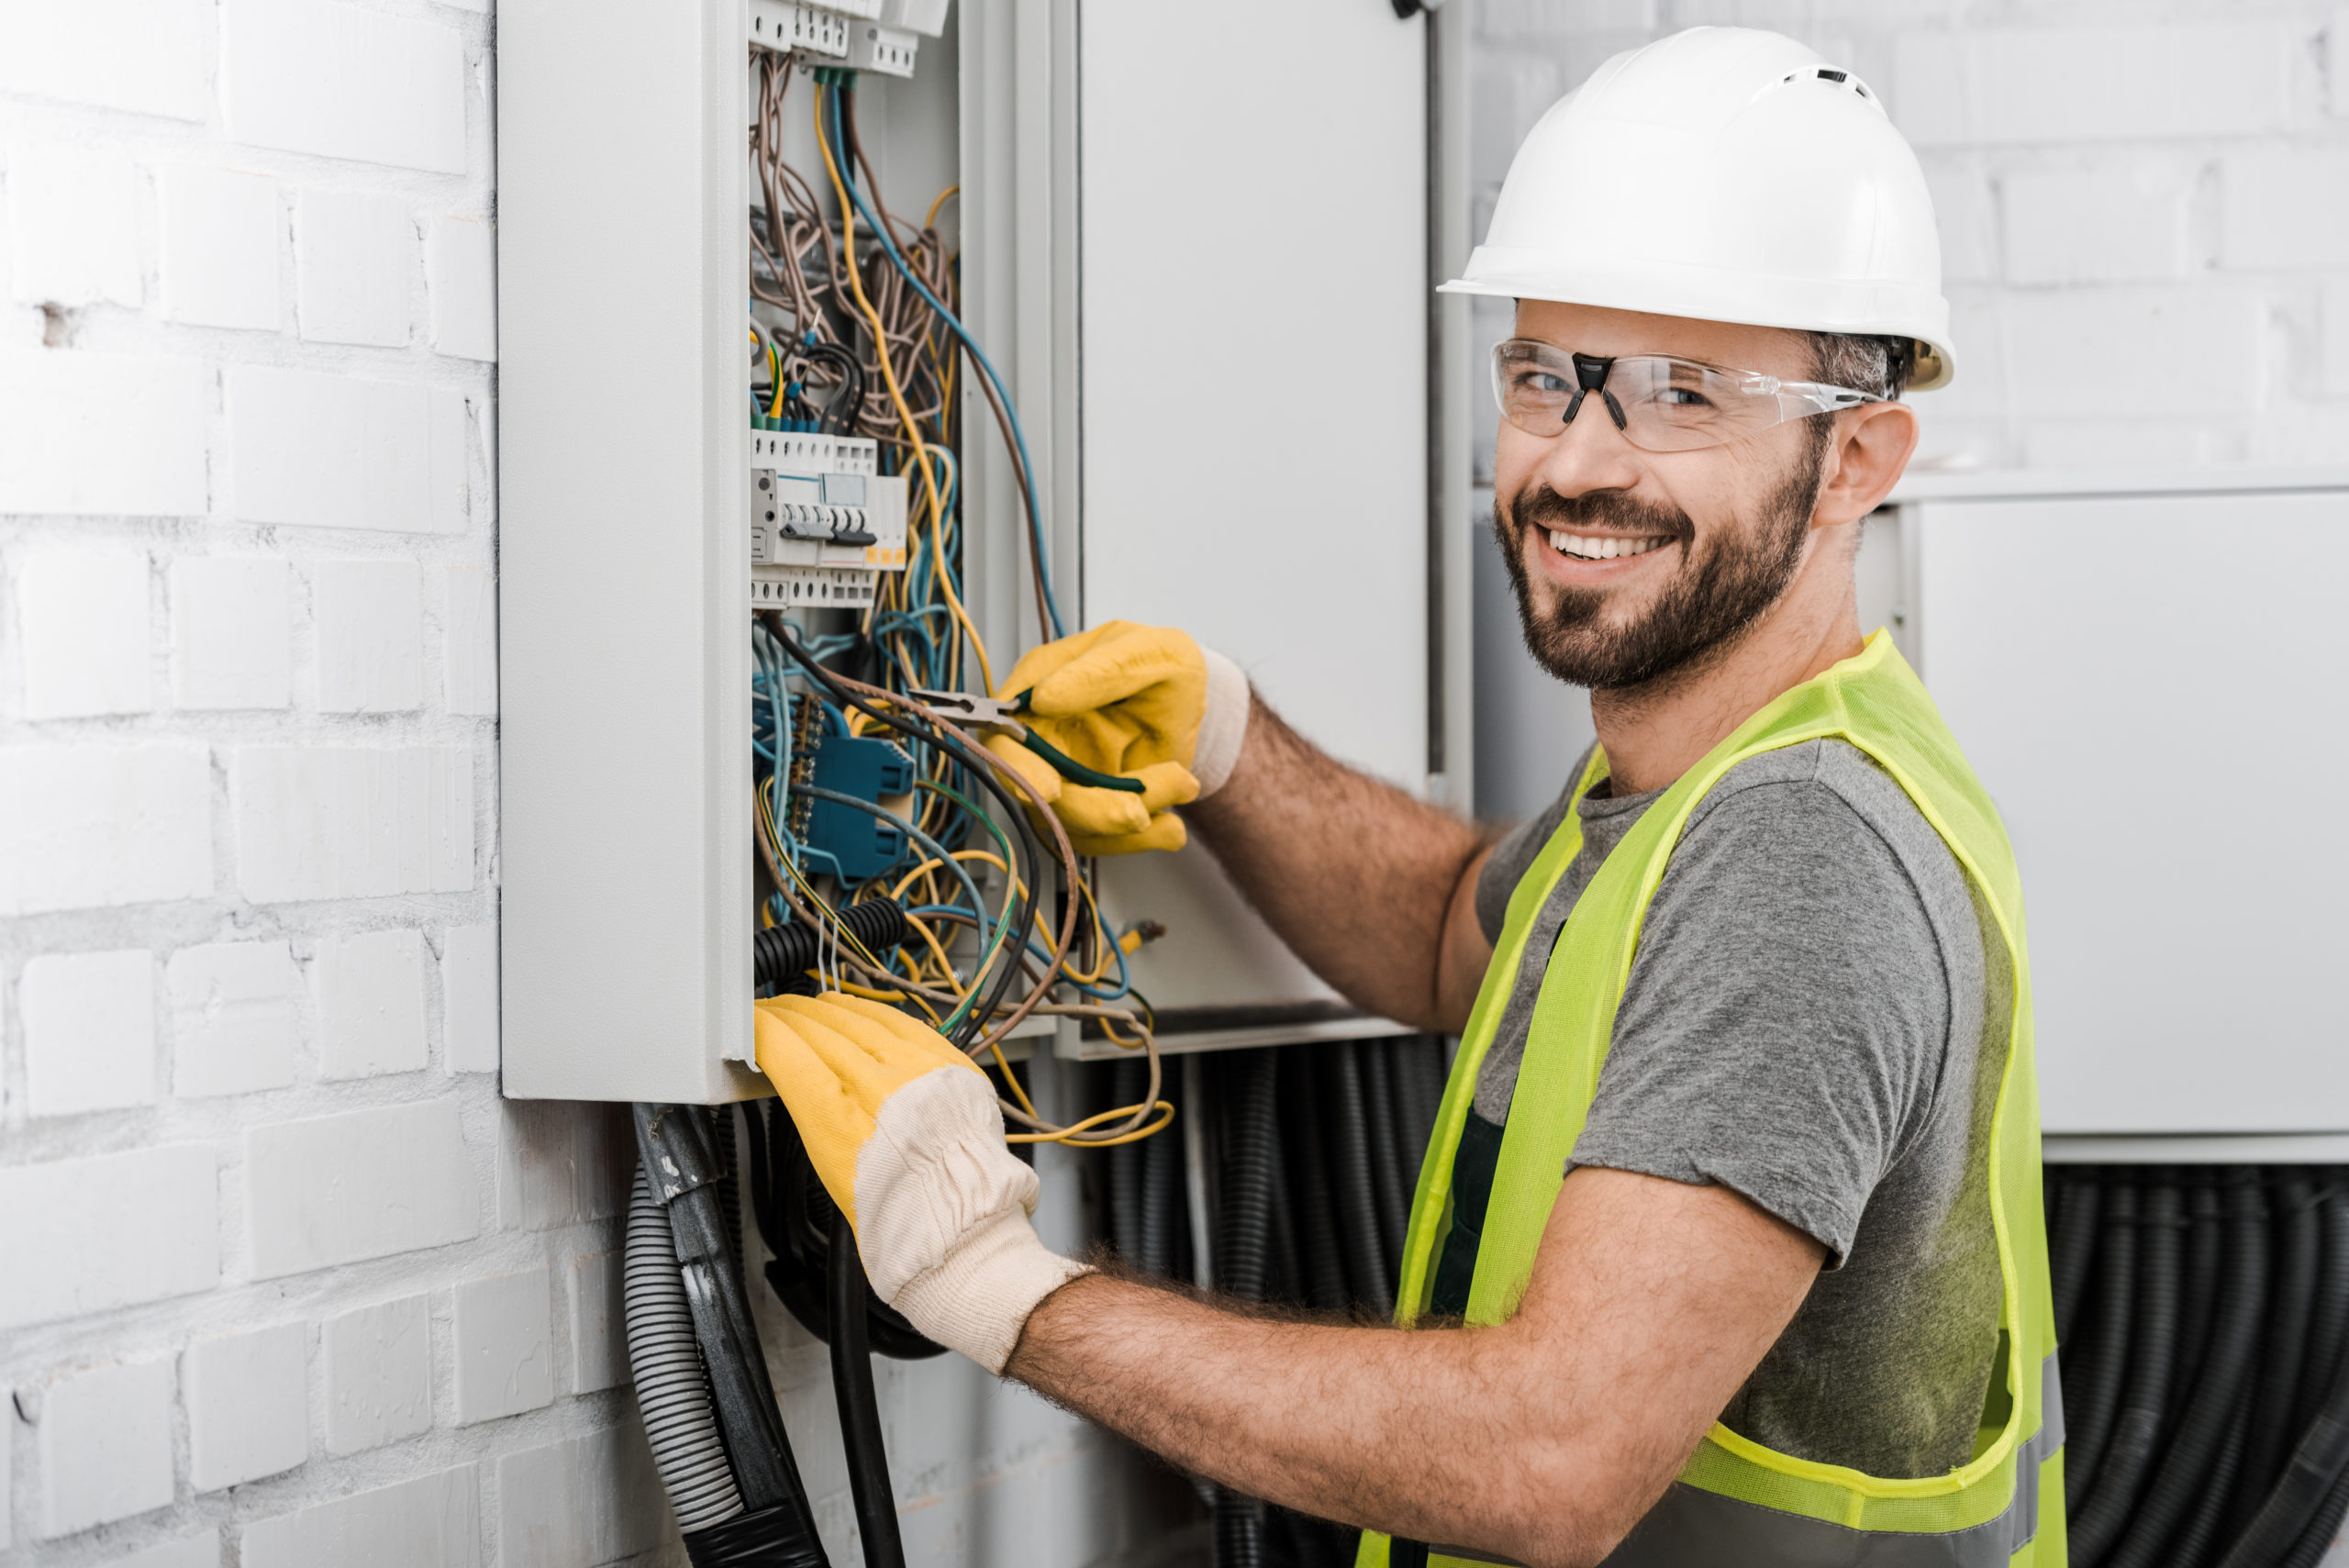 An electrician wearing protective glasses and a hard hat, working on electric wiring. The image shows a professional electrician ensuring safety while performing electrical work